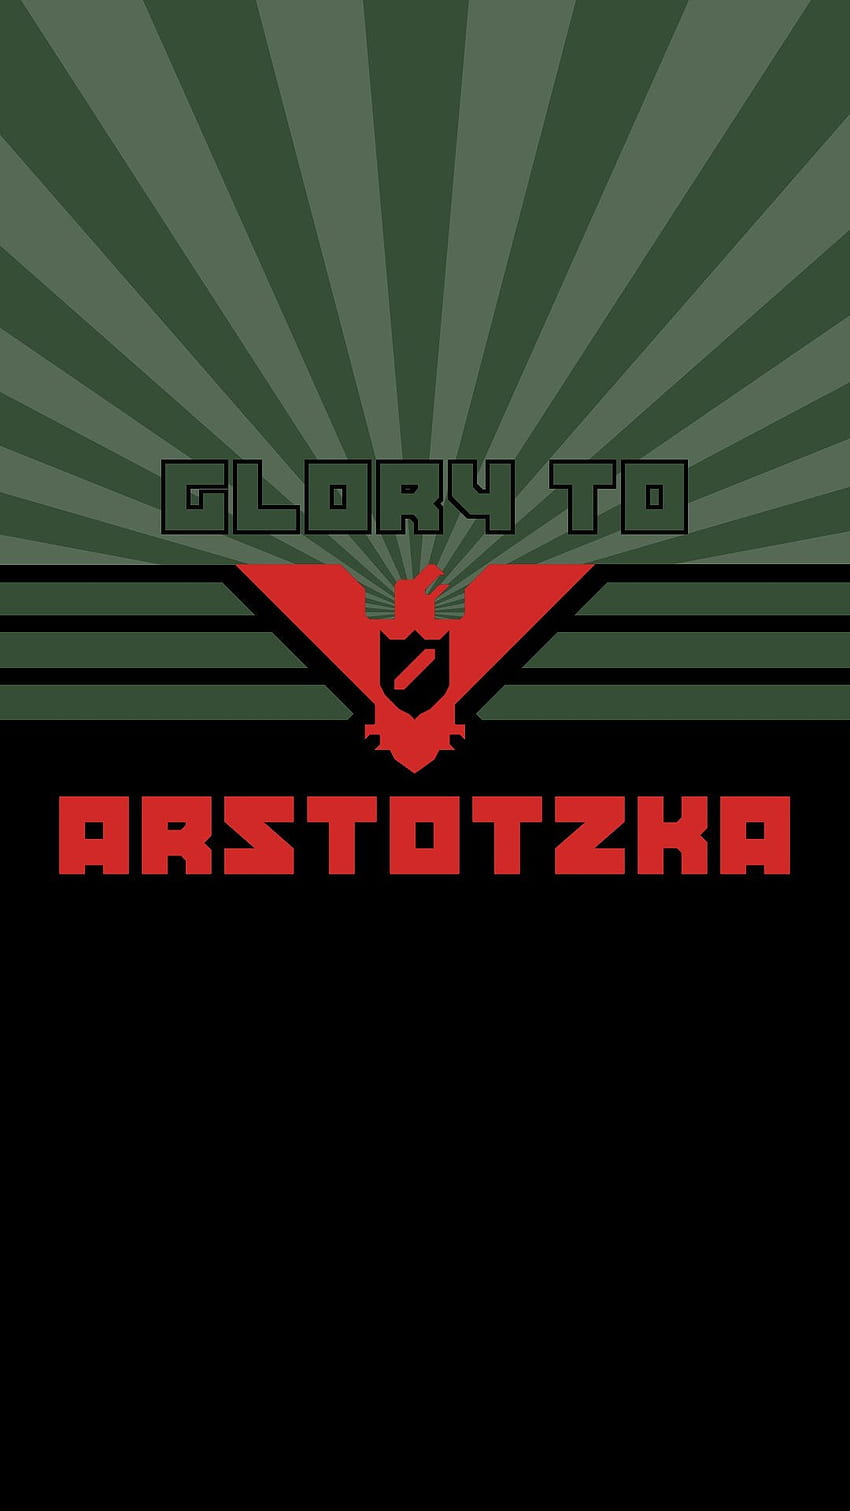 Some patriotic phone background for all of glorious Arstotzkans!: papersplease, Papers, Please HD phone wallpaper